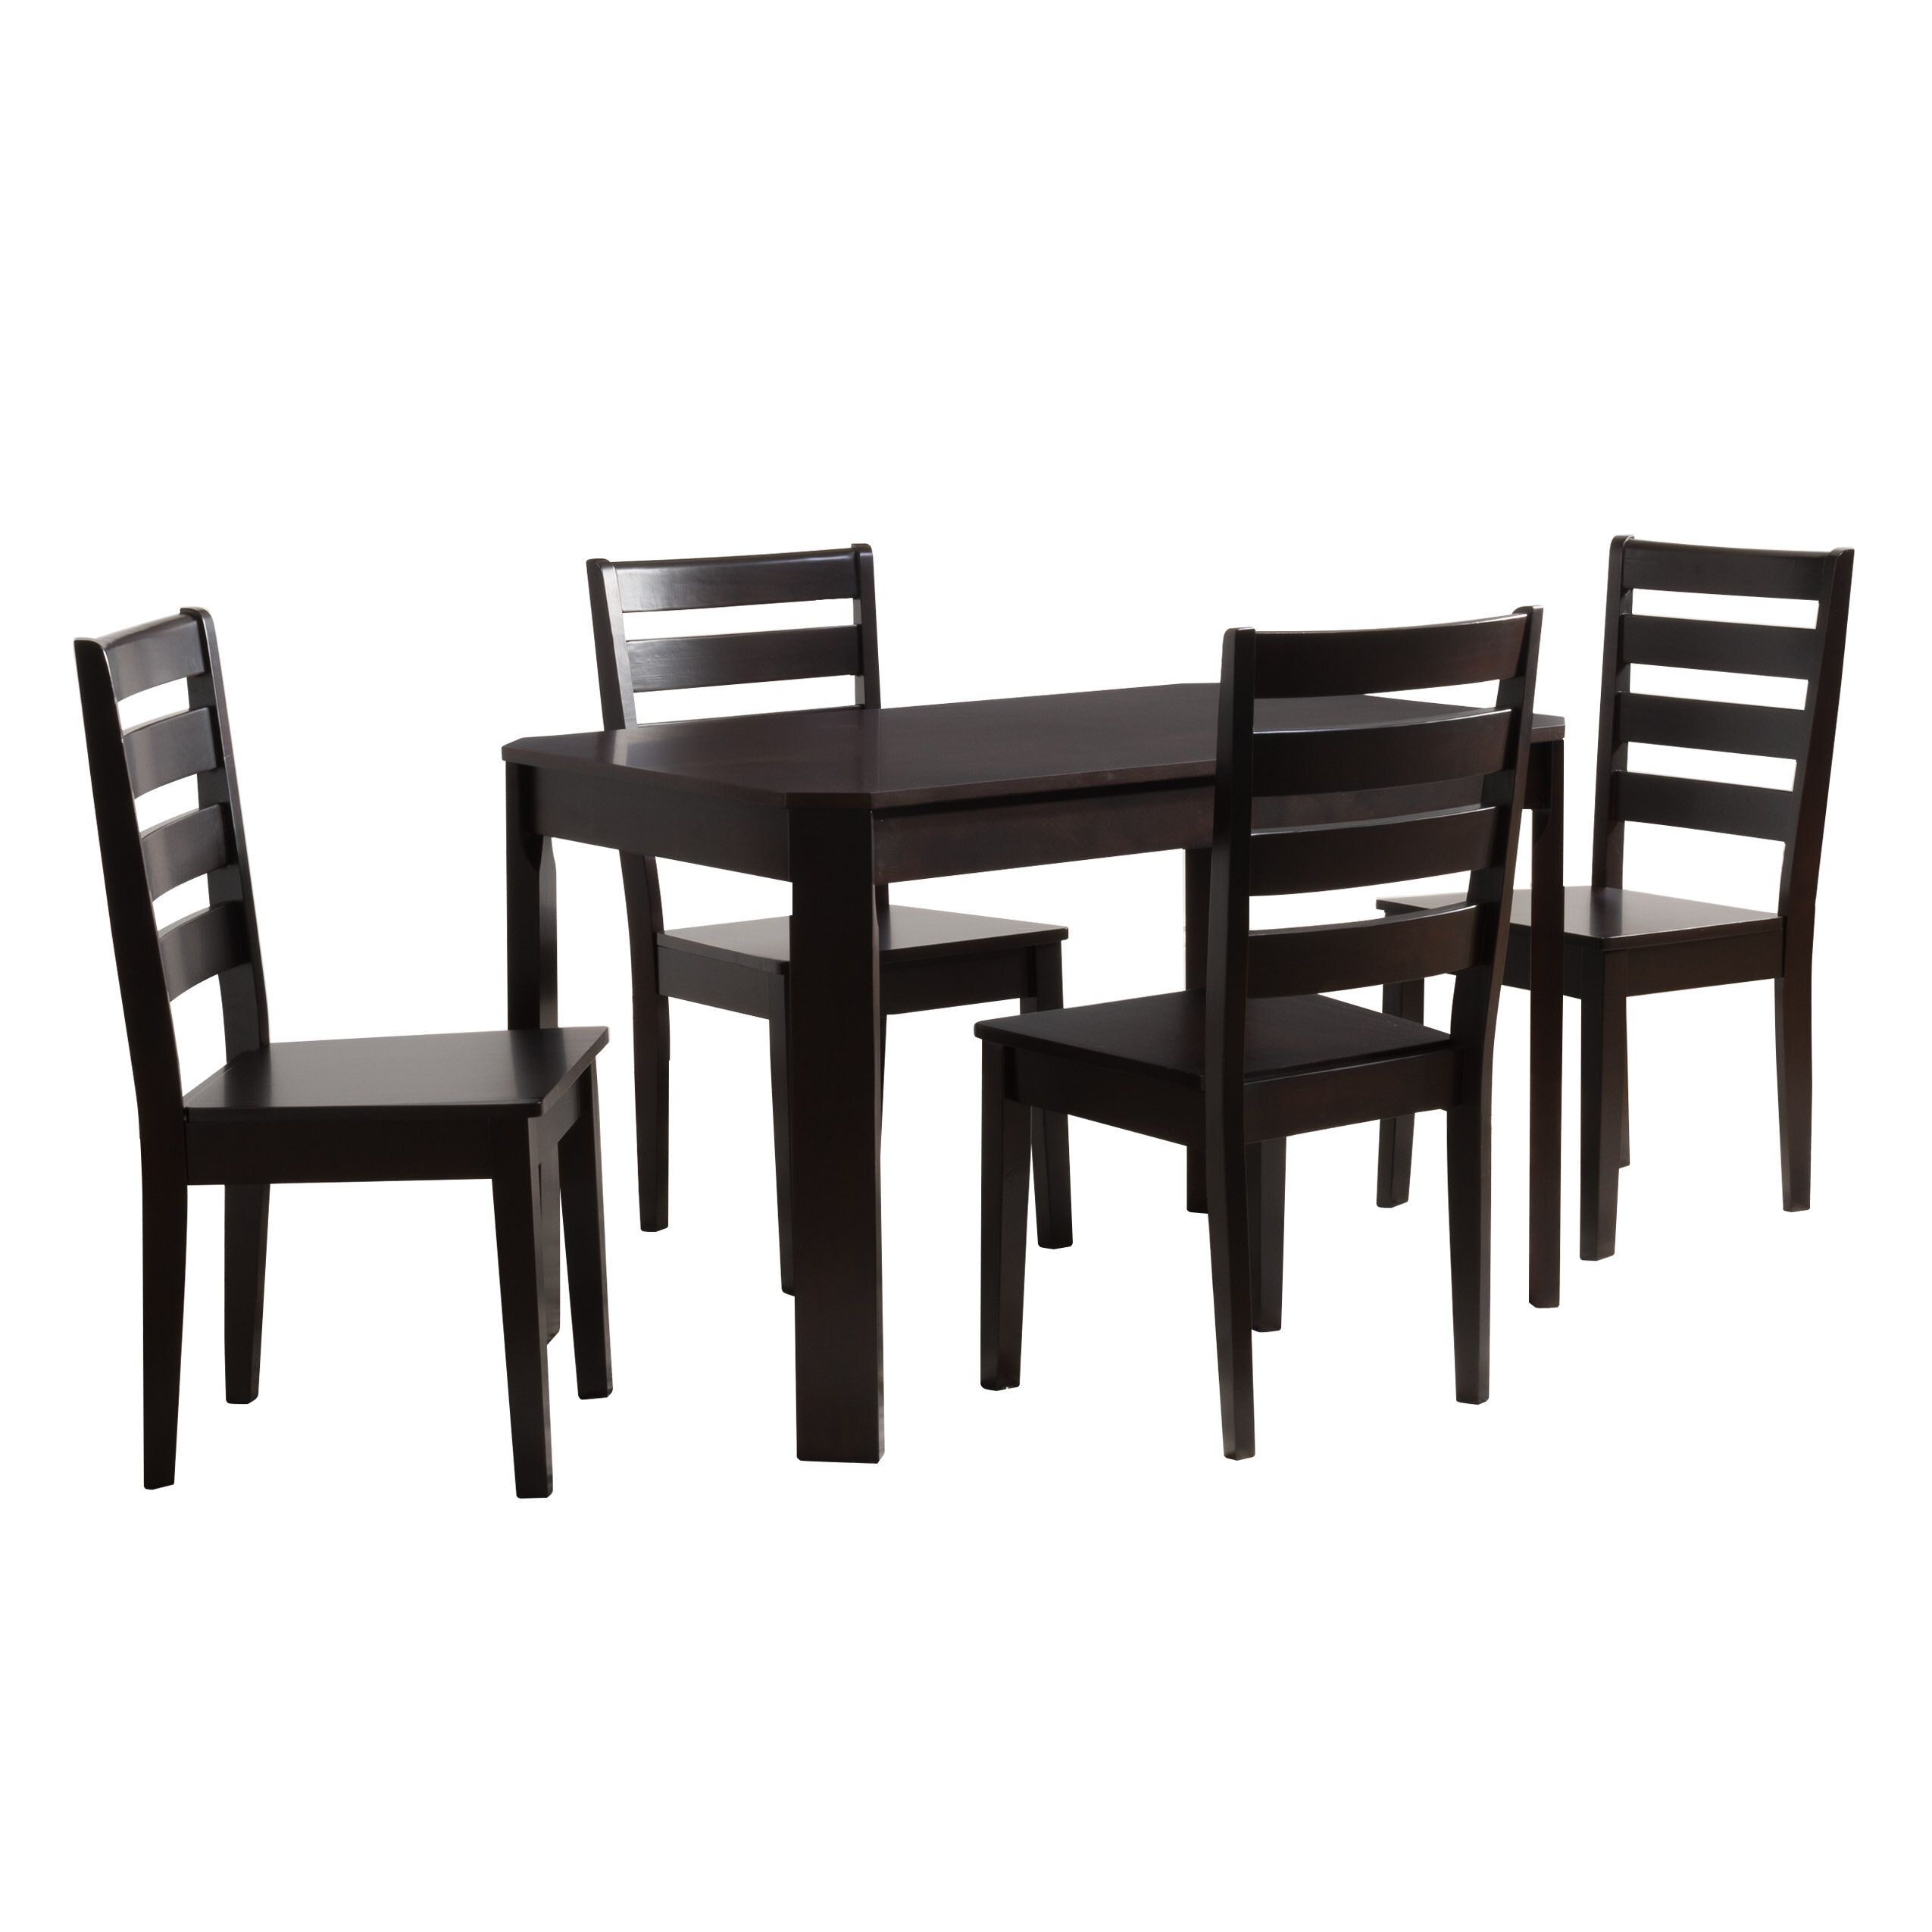 Goodman 5 Piece Solid Wood Dining Set In Most Popular Goodman 5 Piece Solid Wood Dining Sets (Set Of 5) (View 2 of 20)